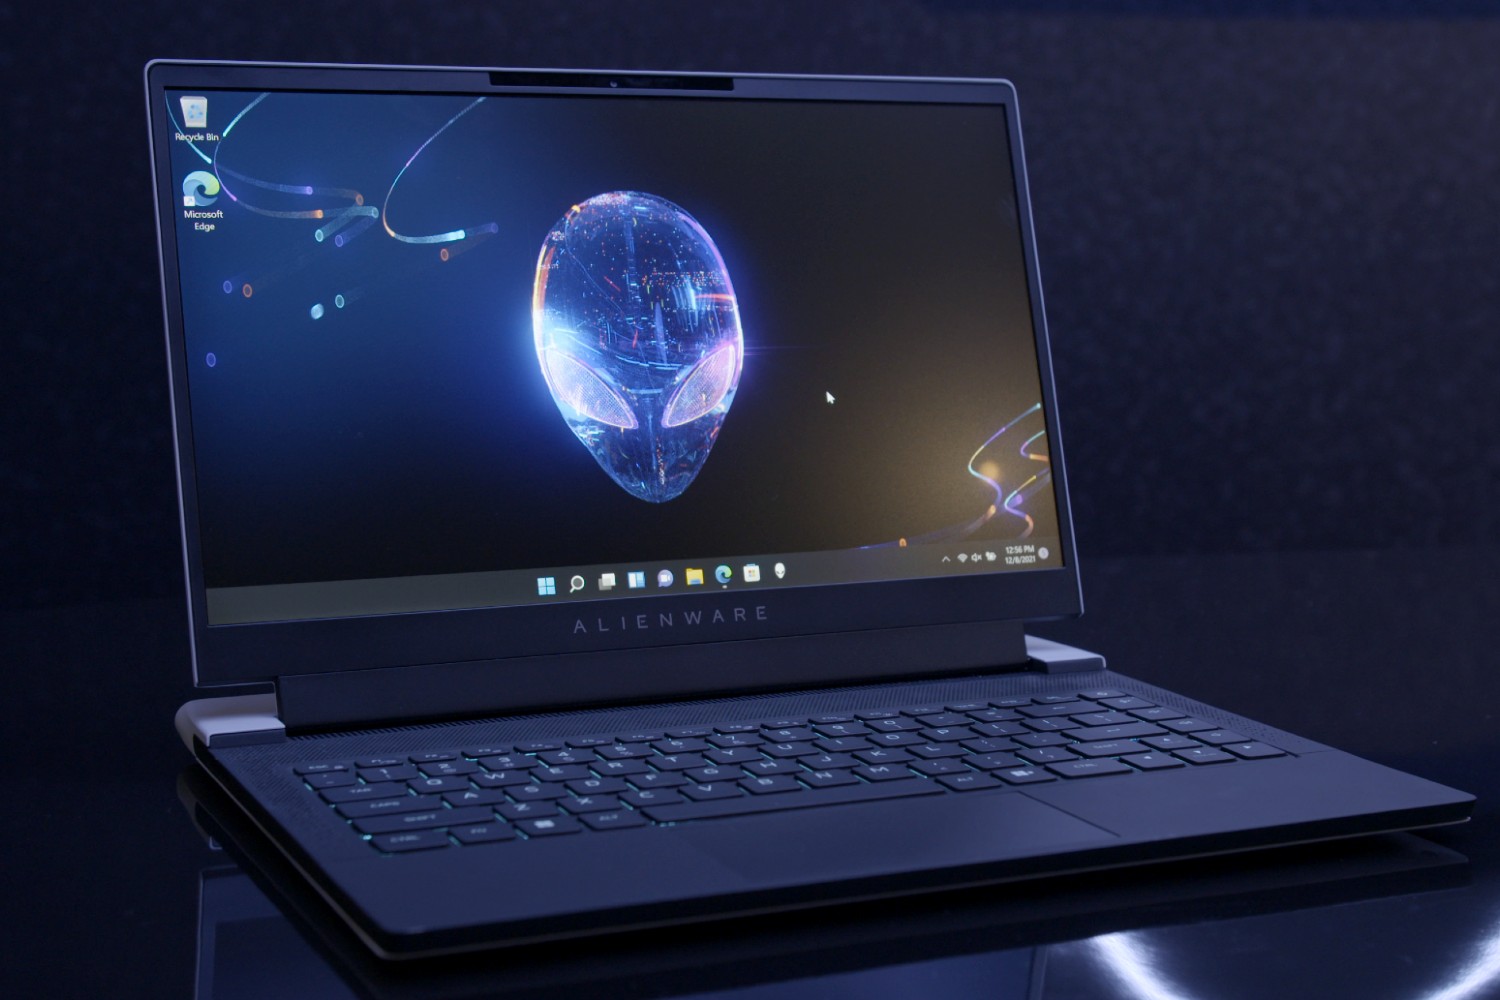 Alienware x14 gaming laptop with an Alienware logo.